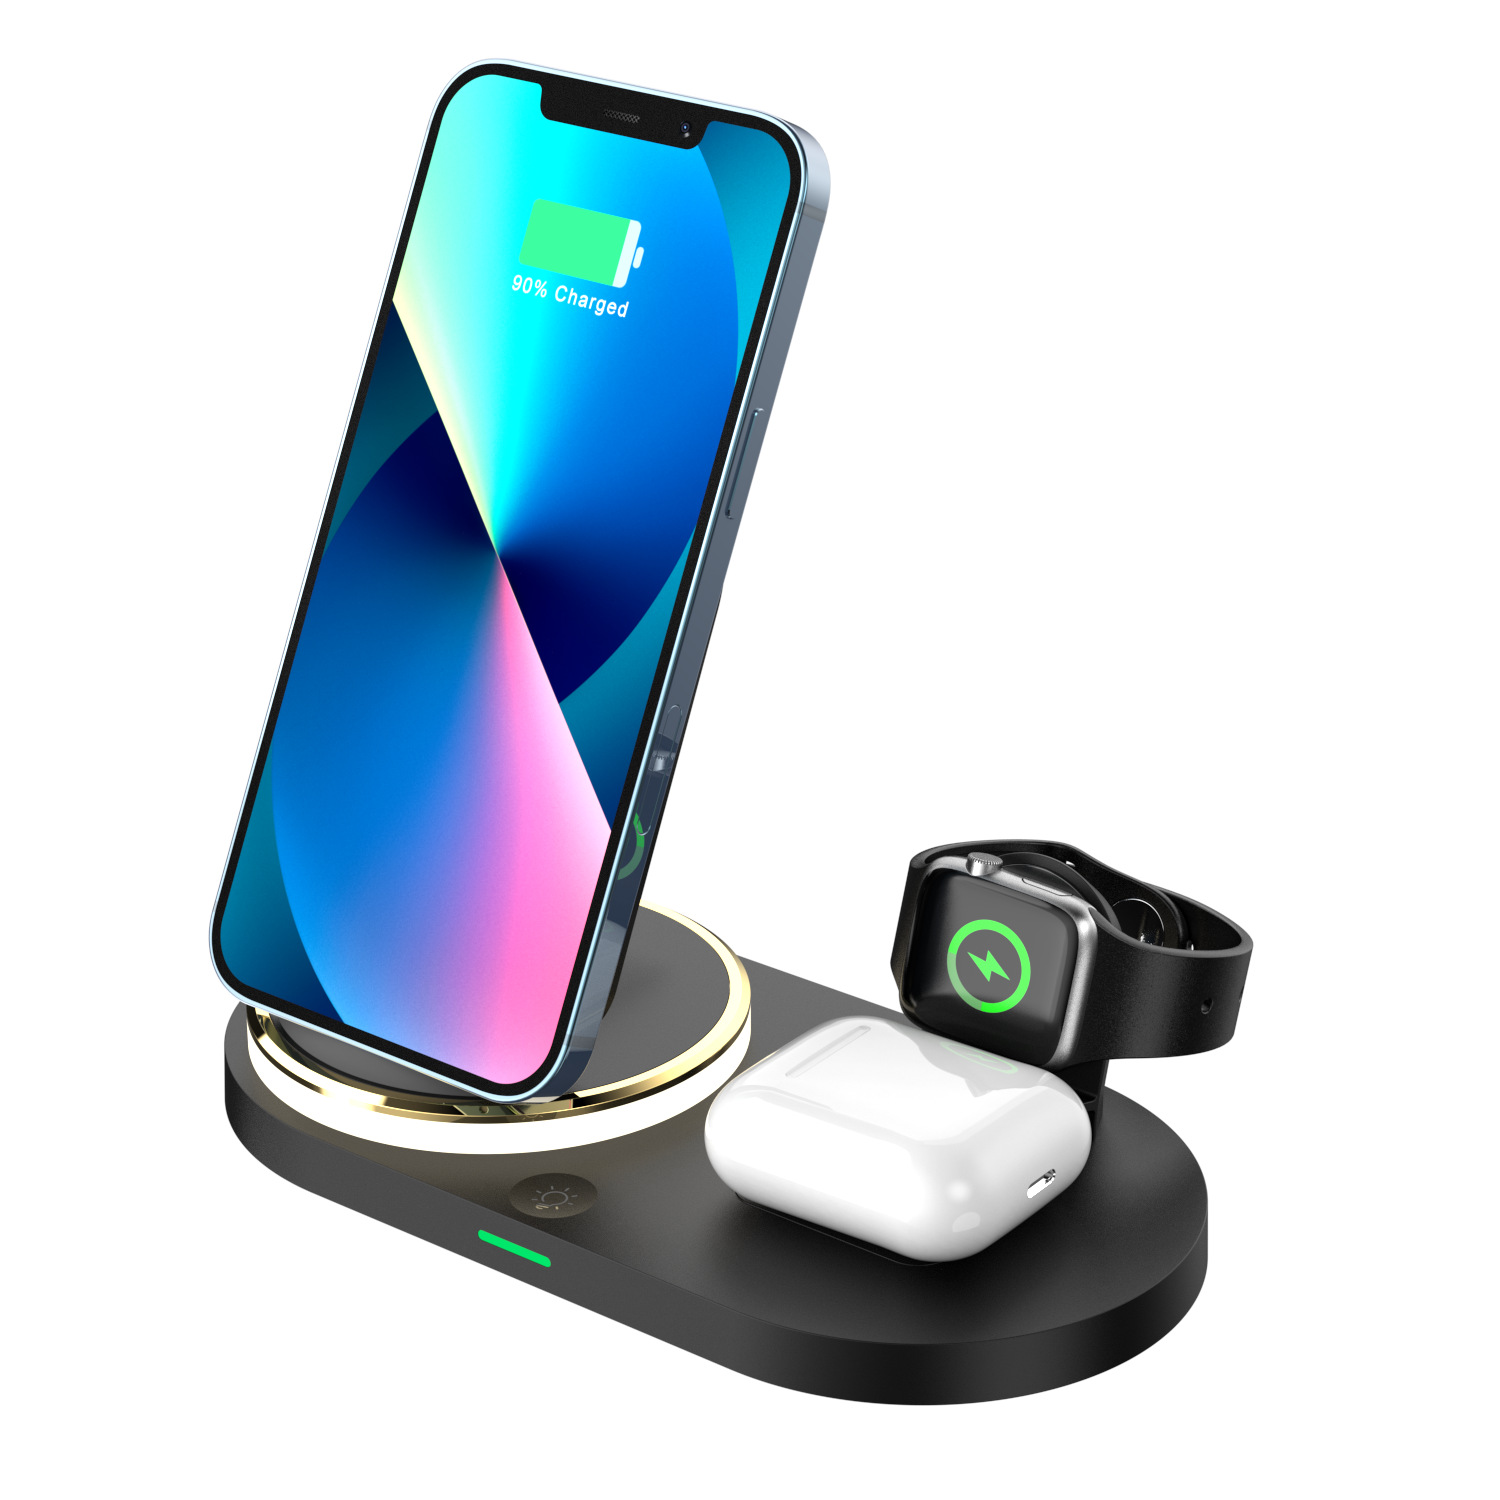 Hot Sale Foreign Trade Folding Five-in-One Wireless Charger Electrical Appliance 15W Suitable for iPhone Earphone Watch Wireless Charger